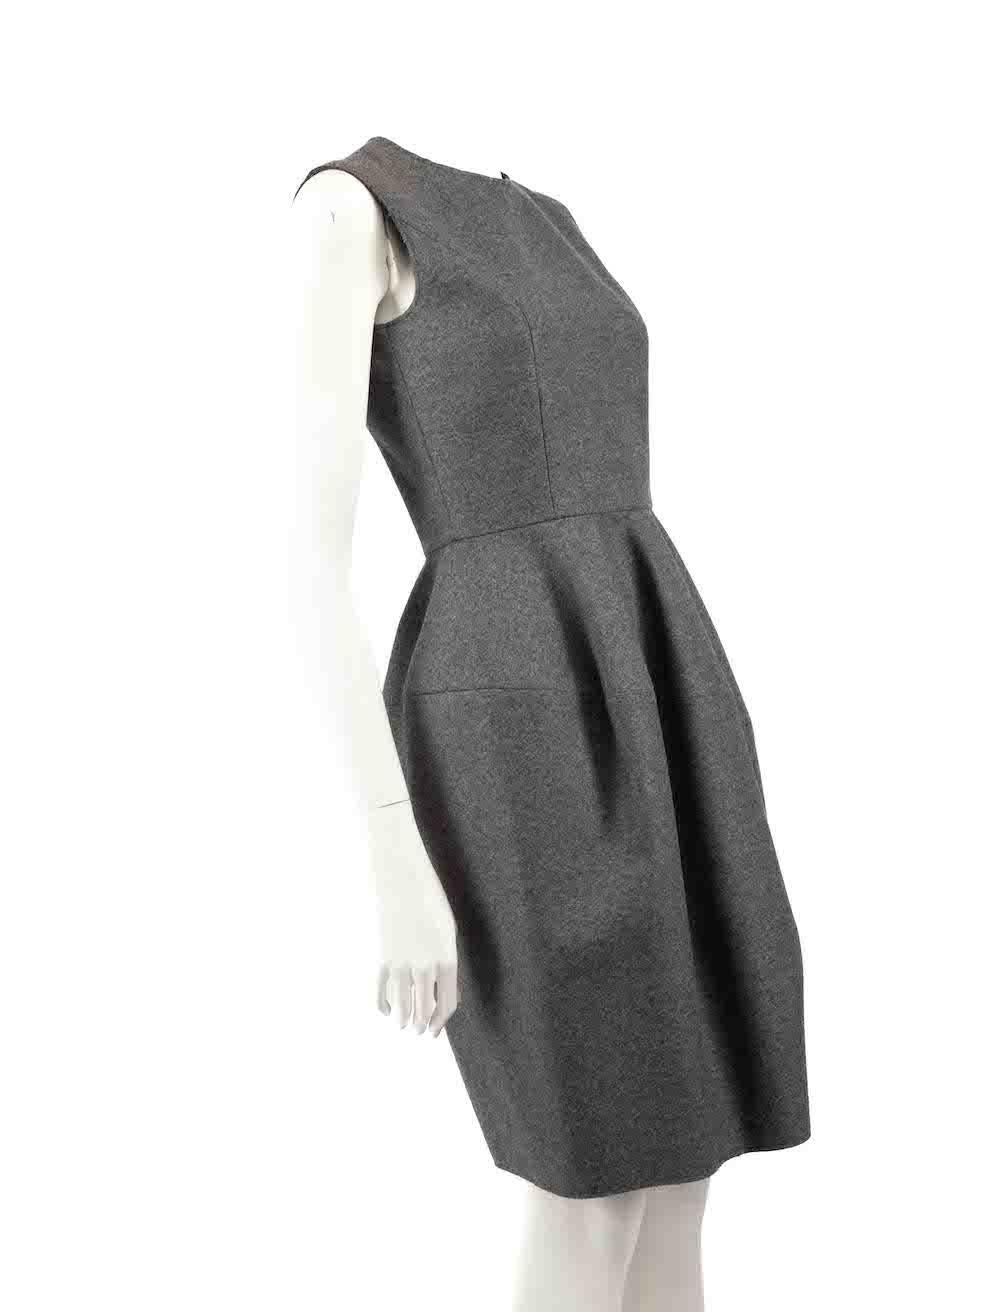 CONDITION is Very good. Hardly any visible wear to dress is evident on this used Saint Laurent designer resale item.
 
 
 
 Details
 
 
 A/W 2008
 
 Grey
 
 Wool
 
 Dress
 
 Knee length
 
 Sleeveless
 
 Back zip and hook fastening
 
 
 
 
 
 Made in